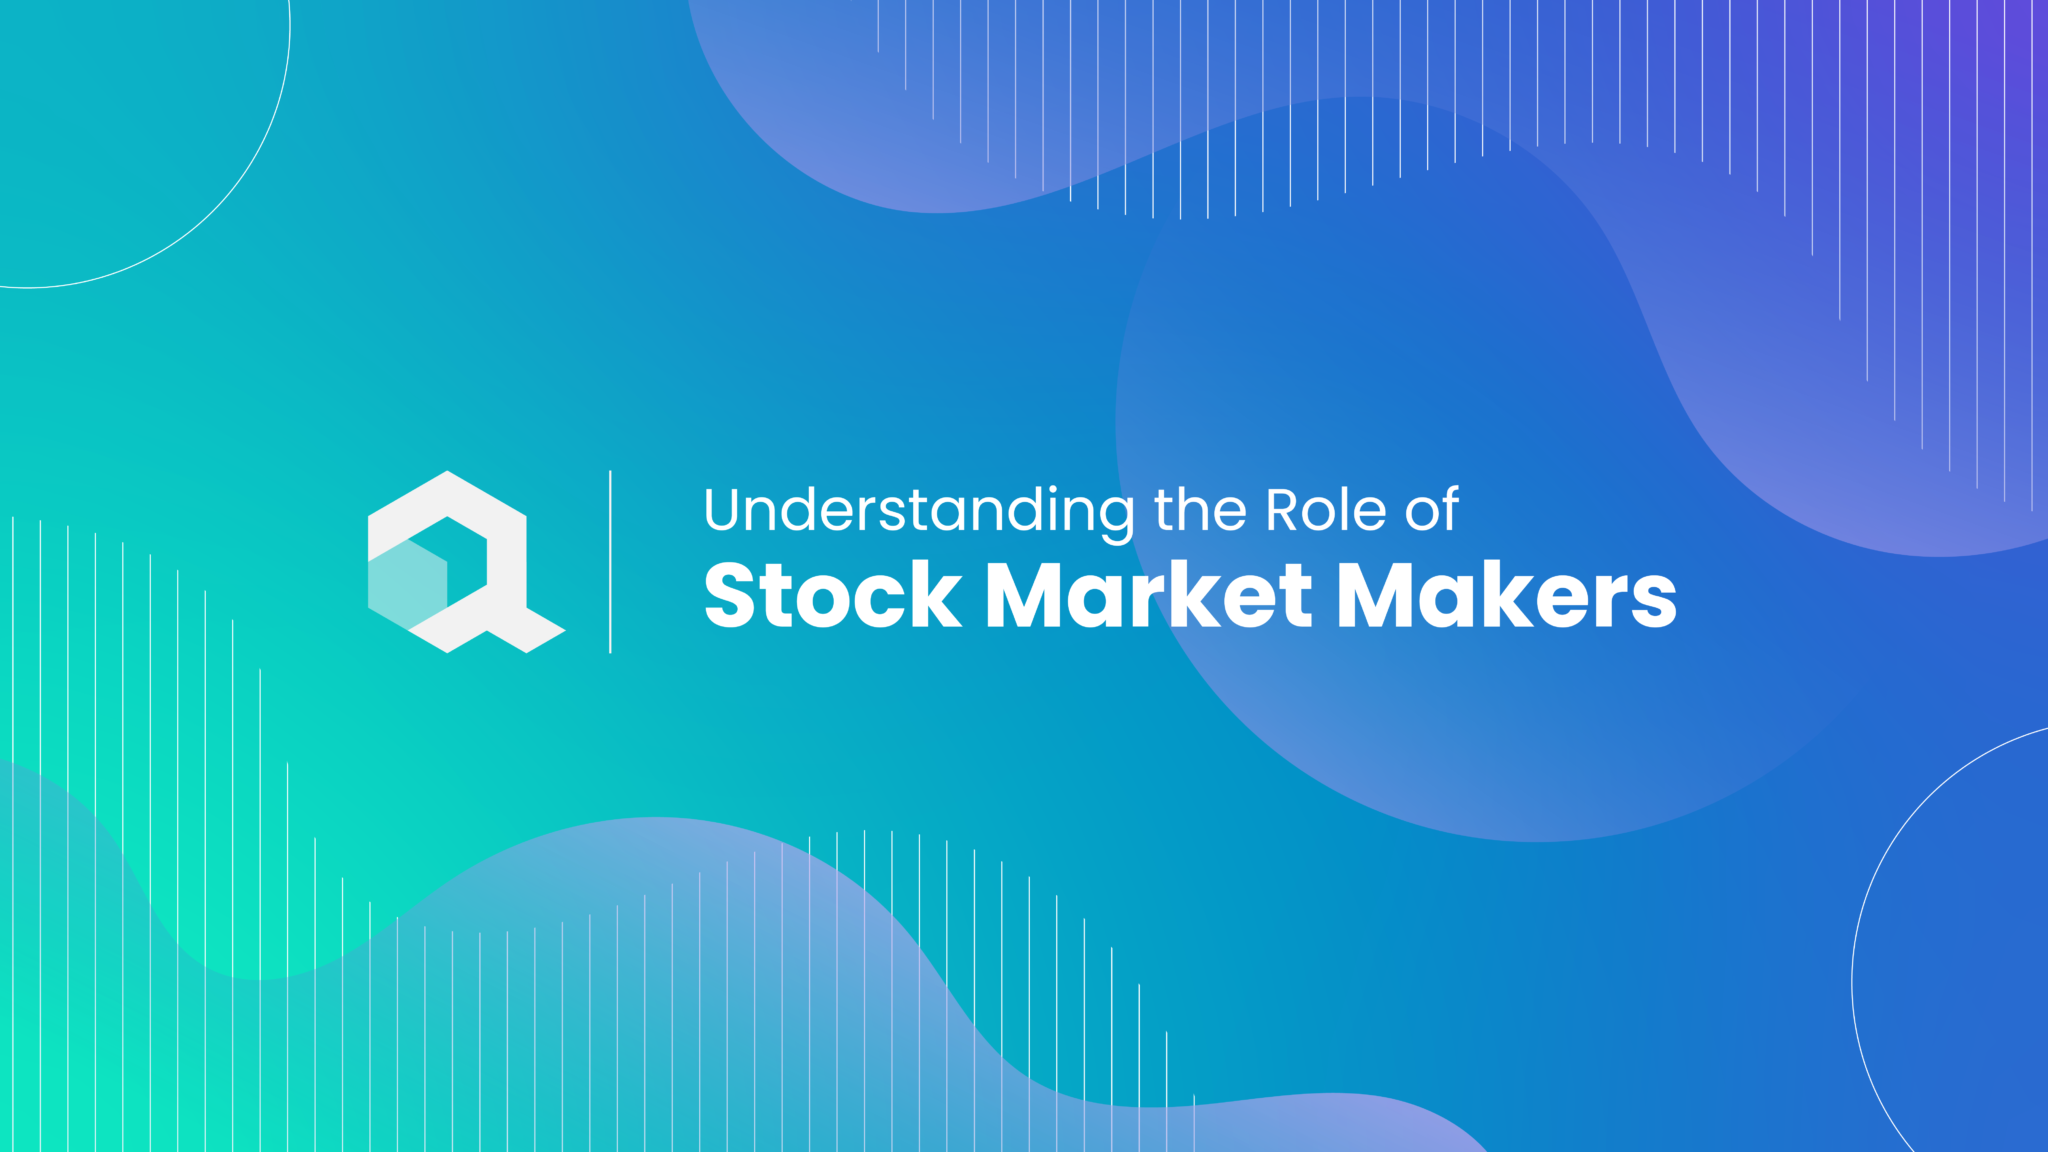 Understanding the Role of Stock Market Makers